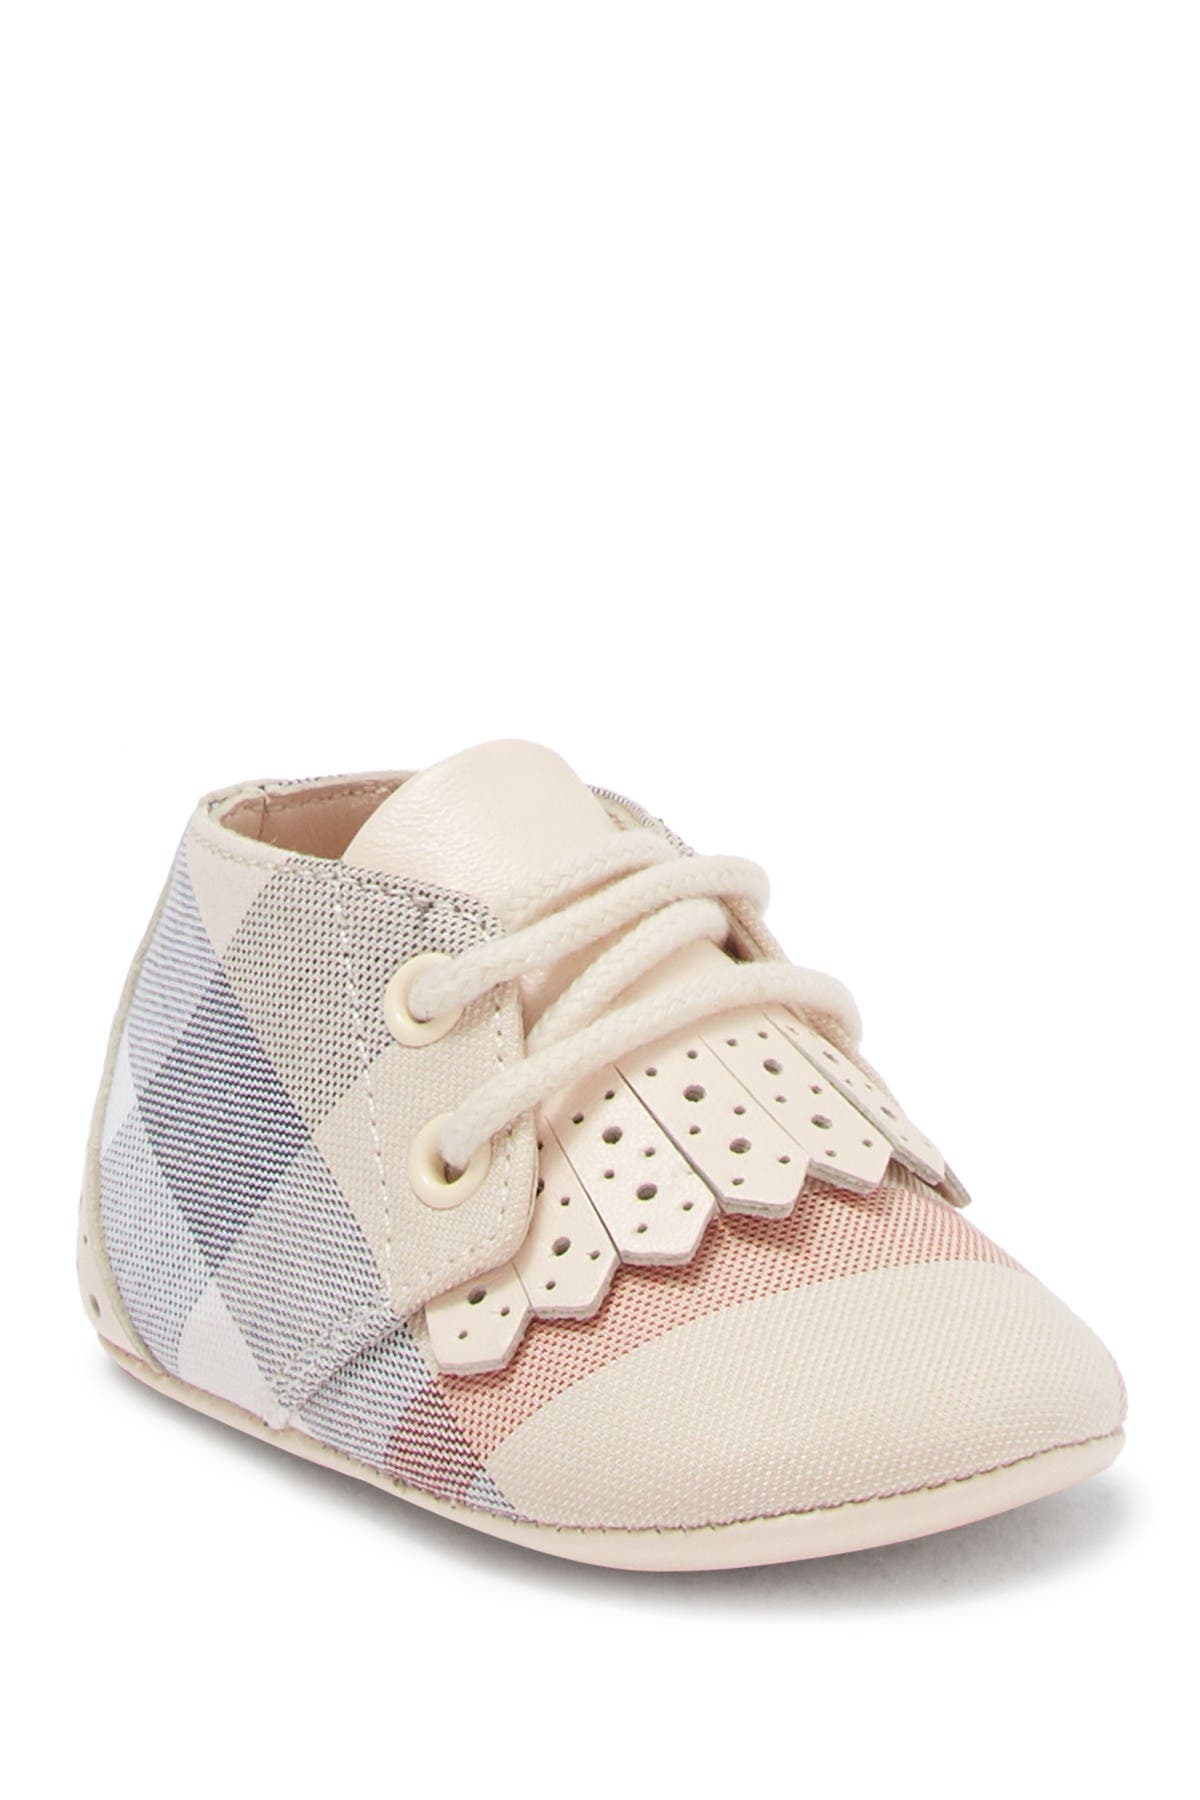 nordstrom rack baby shoes